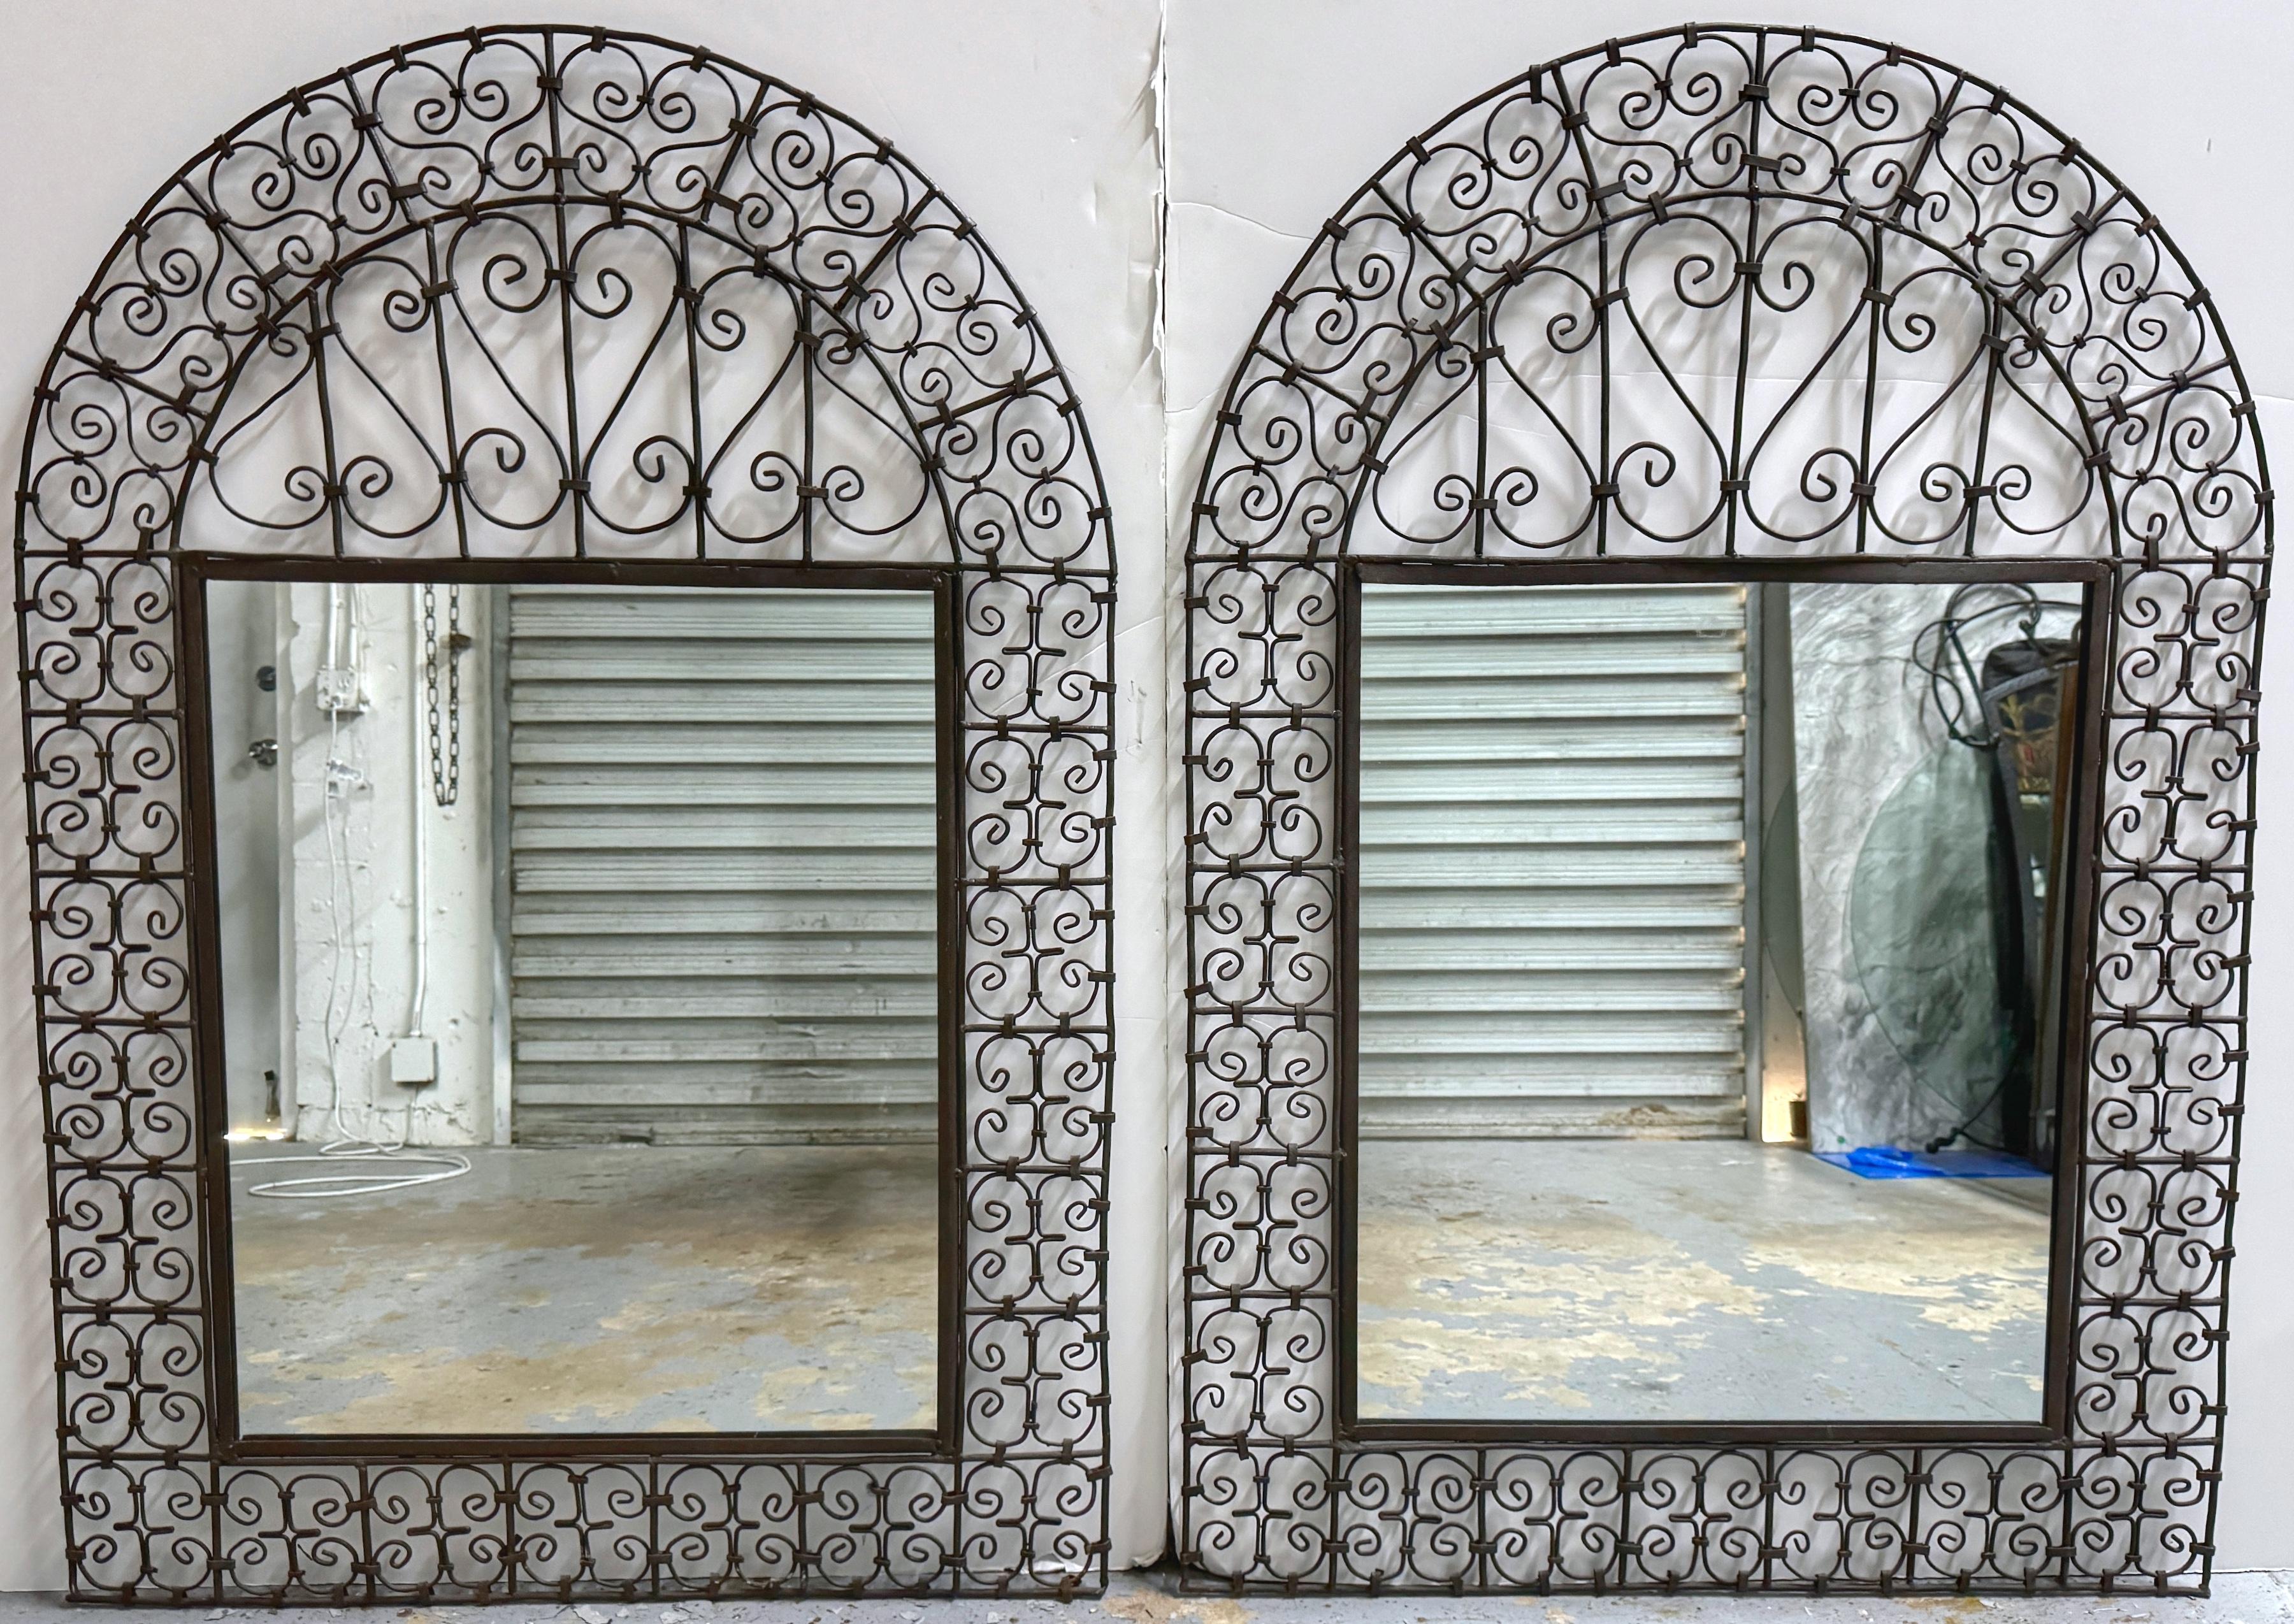 Pair of Spanish Colonial Wrought Iron Trellis Motif Mirrors
Spain, Circa 1960s

A large Pair of Spanish Colonial wrought iron trellis motif mirrors originating from 1960s Spain. Each mirror boasts a neoclassical Spanish Colonial design standing 52